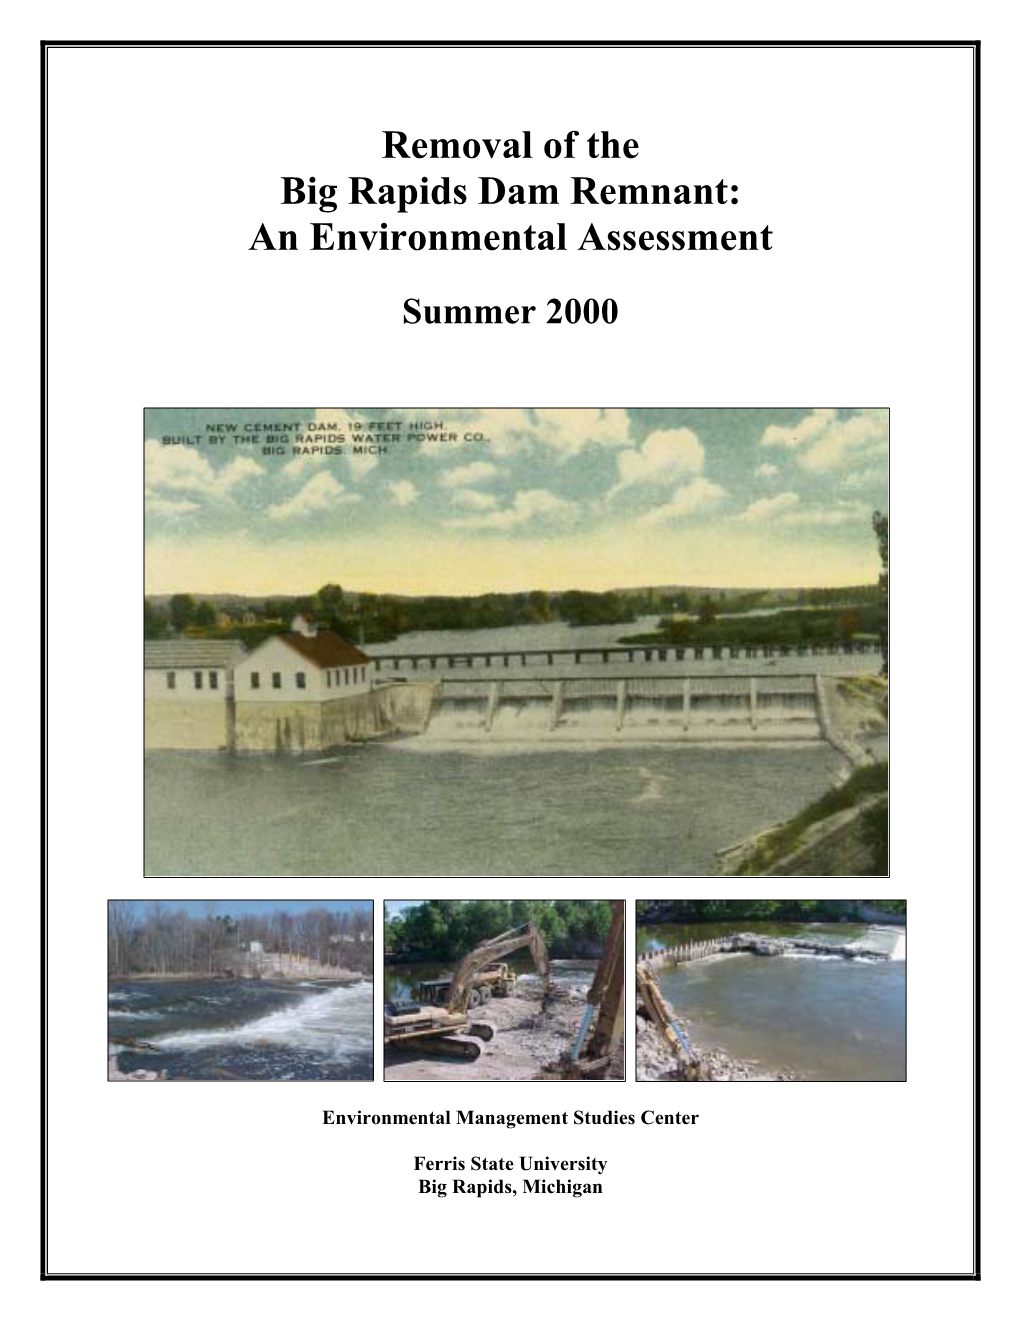 Removal of the Big Rapids Dam Remnant: an Environmental Assessment Summer 2000